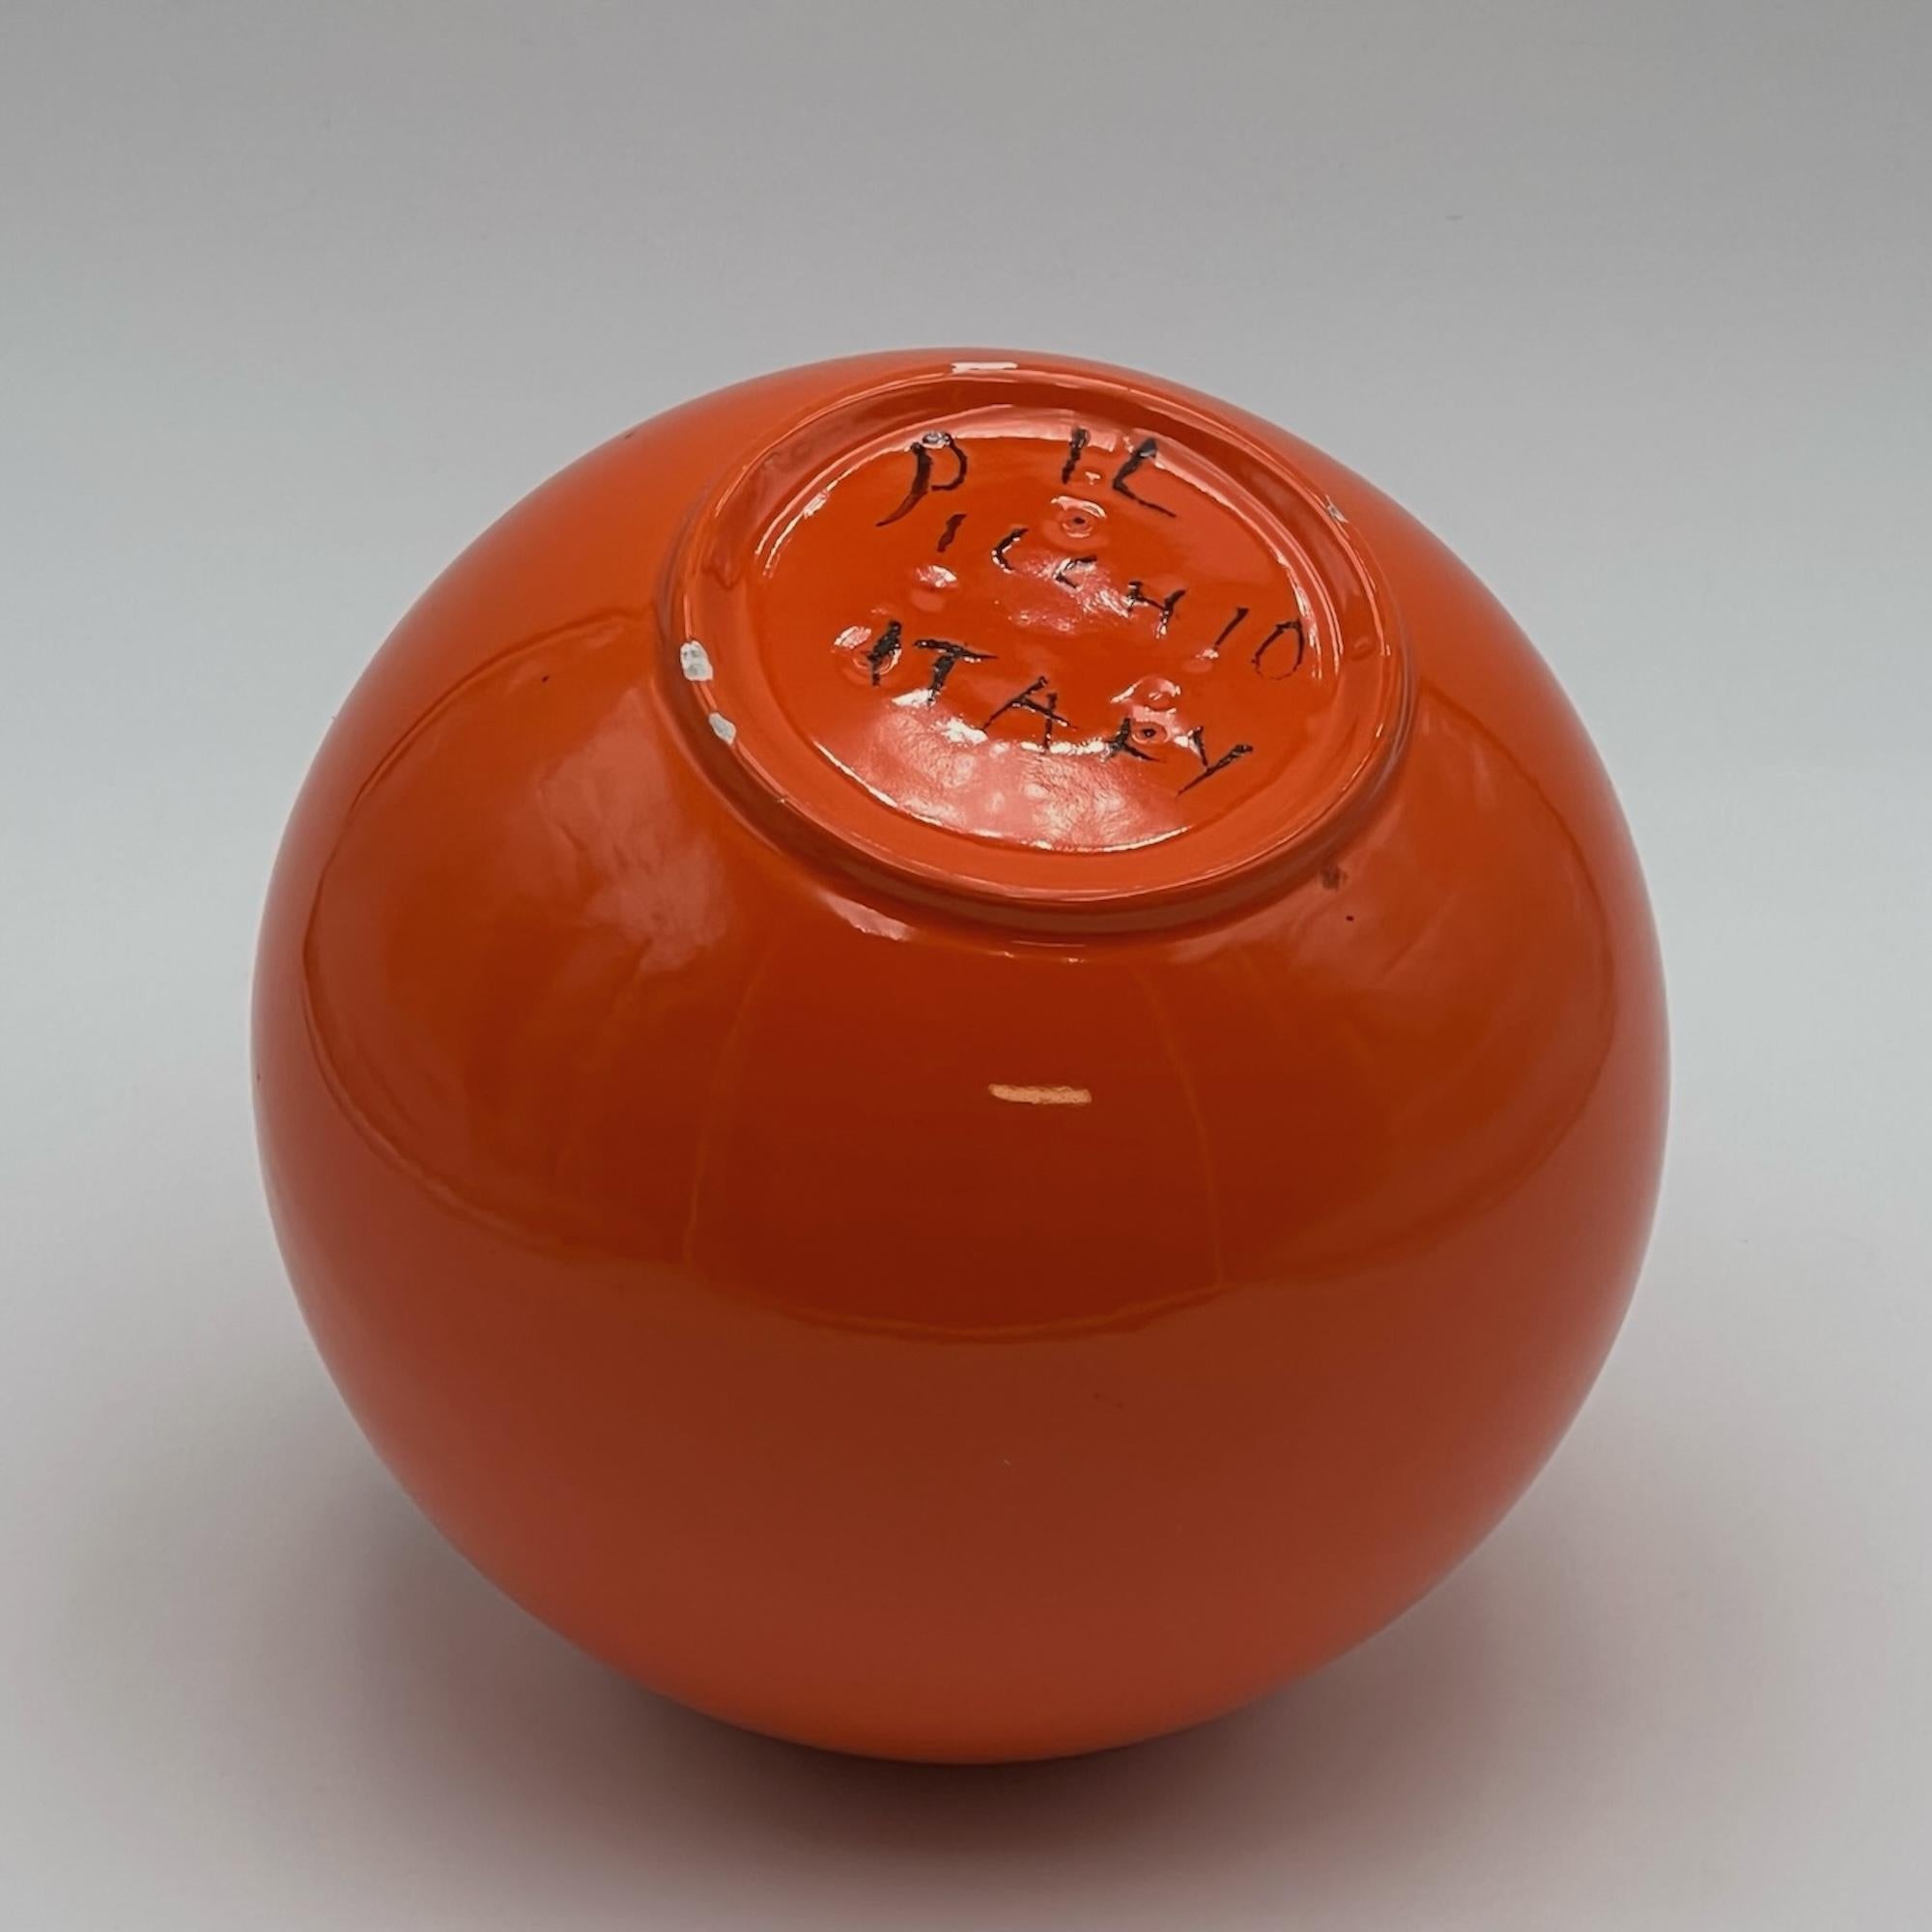 The 'Bowling ball' vase is an artistic ceramic vase designed by the designer Enzo Bioli (Parma 1932 - 2006) and produced by the historic company 